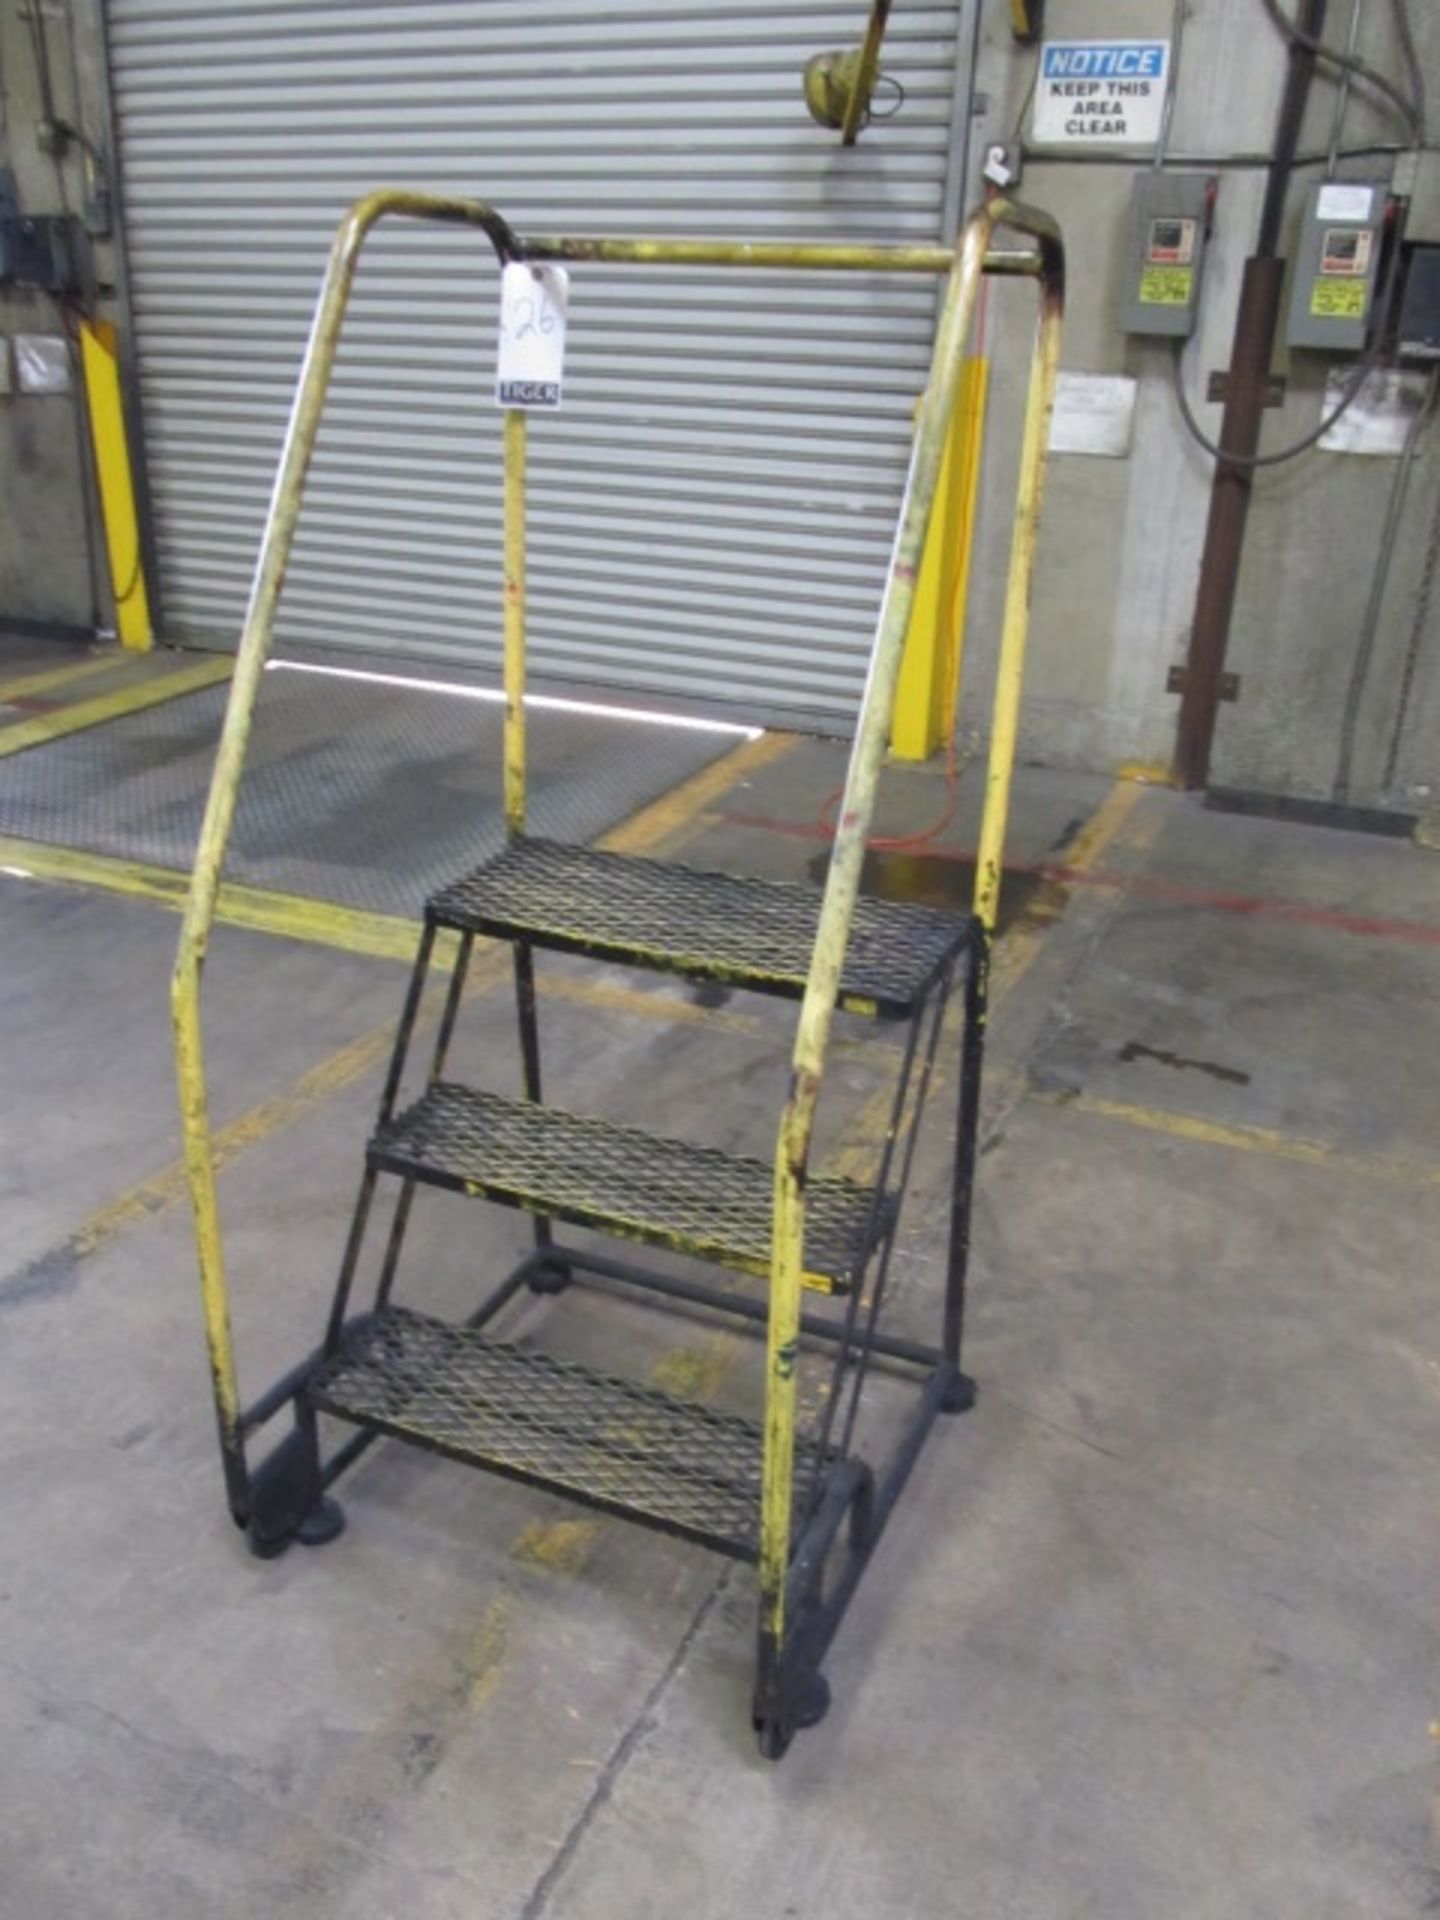 Cotterman 350lb Capacity 3 Step Rolling Staircase. Asset Location: West Warehouse, Site Location: